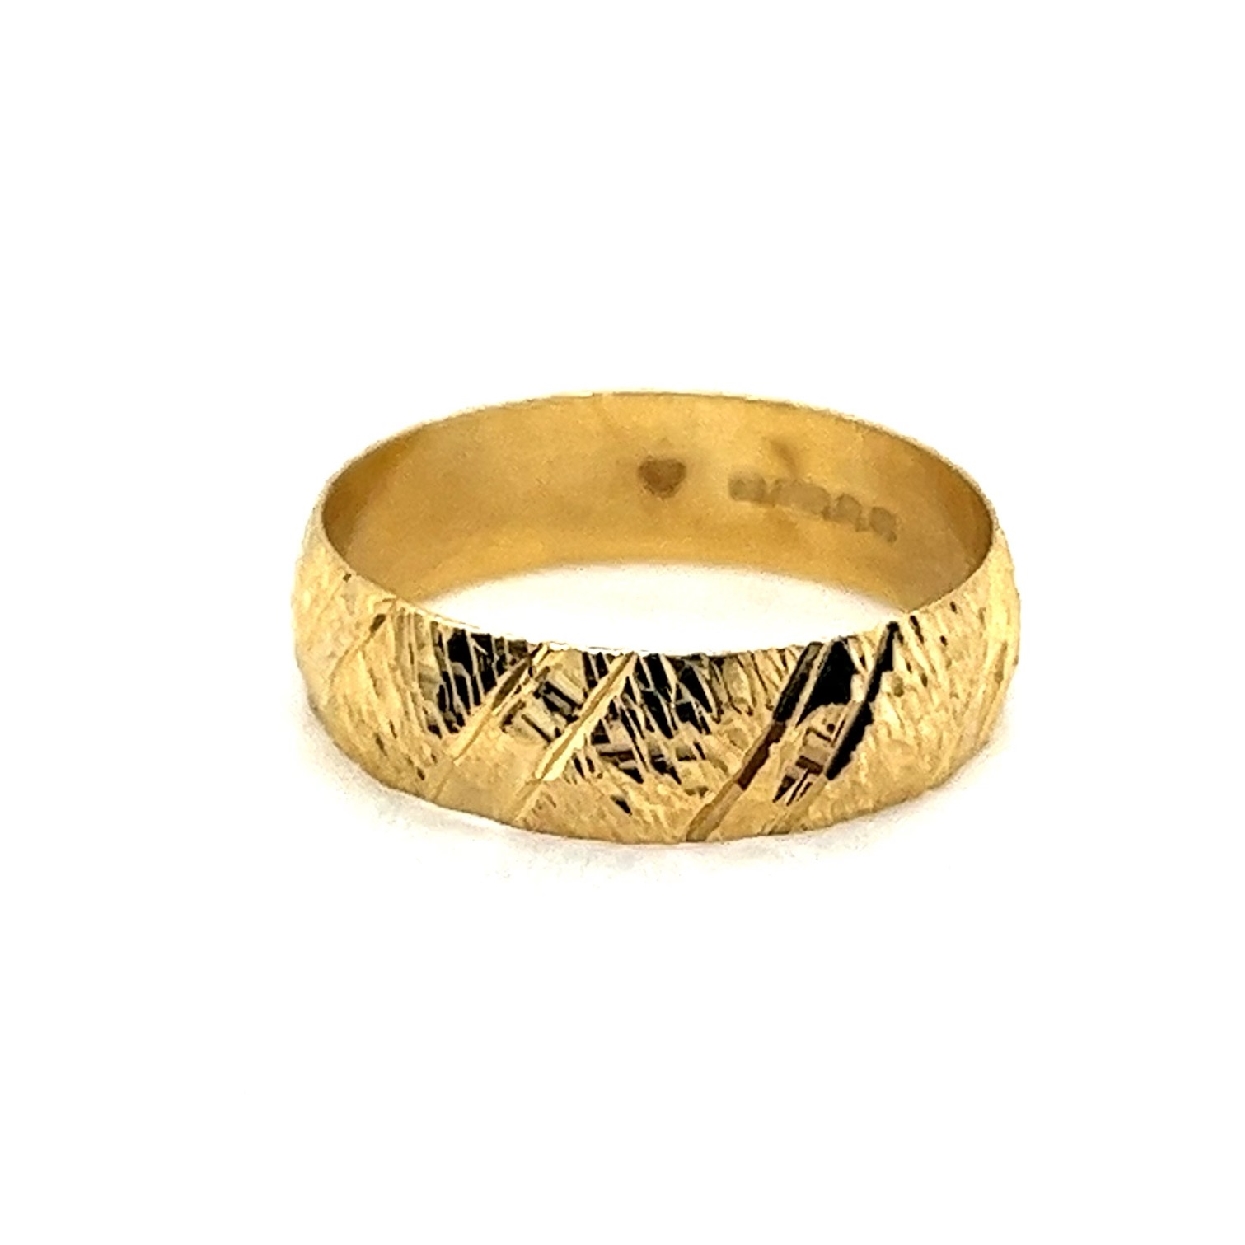 18K Yellow Gold Wedding Band with Etched Details

Size 6.75